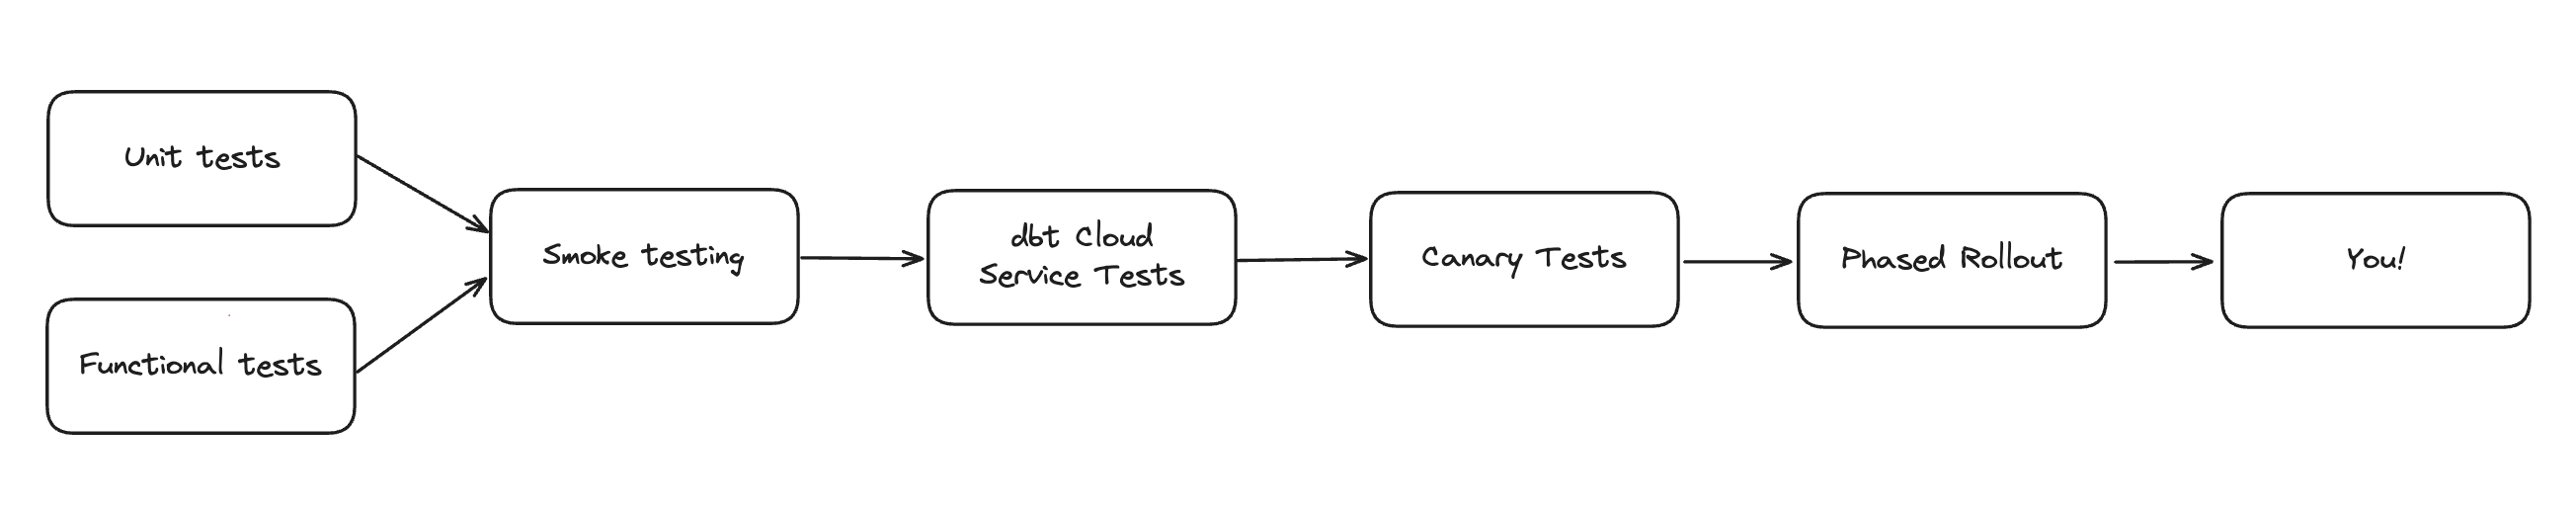 Testing and deploy pipeline